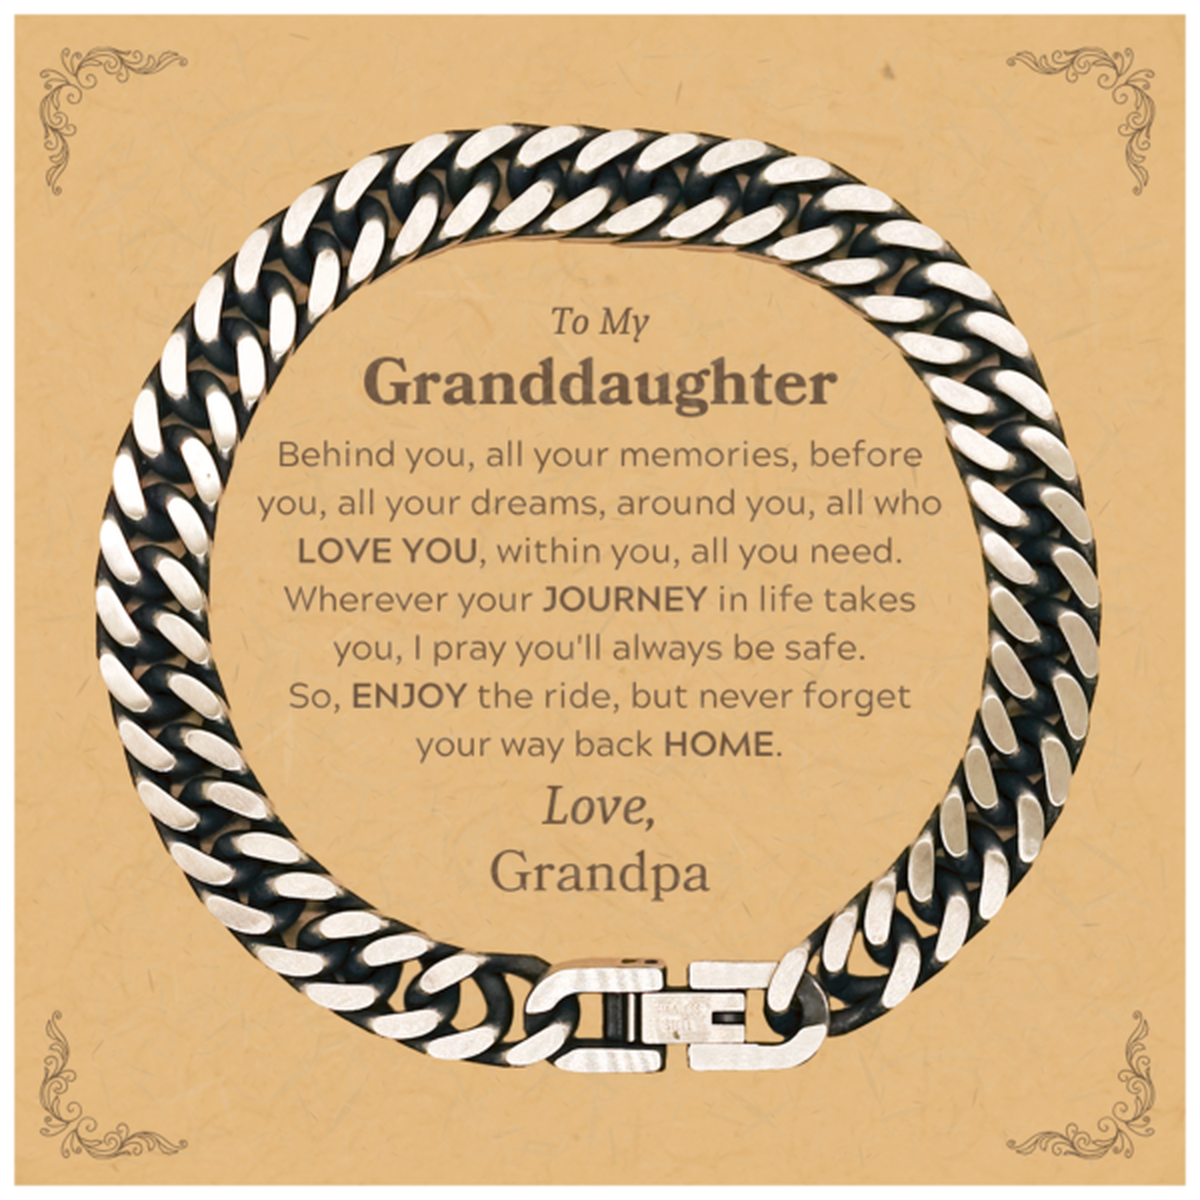 To My Granddaughter Graduation Gifts from Grandpa, Granddaughter Cuban Link Chain Bracelet Christmas Birthday Gifts for Granddaughter Behind you, all your memories, before you, all your dreams. Love, Grandpa